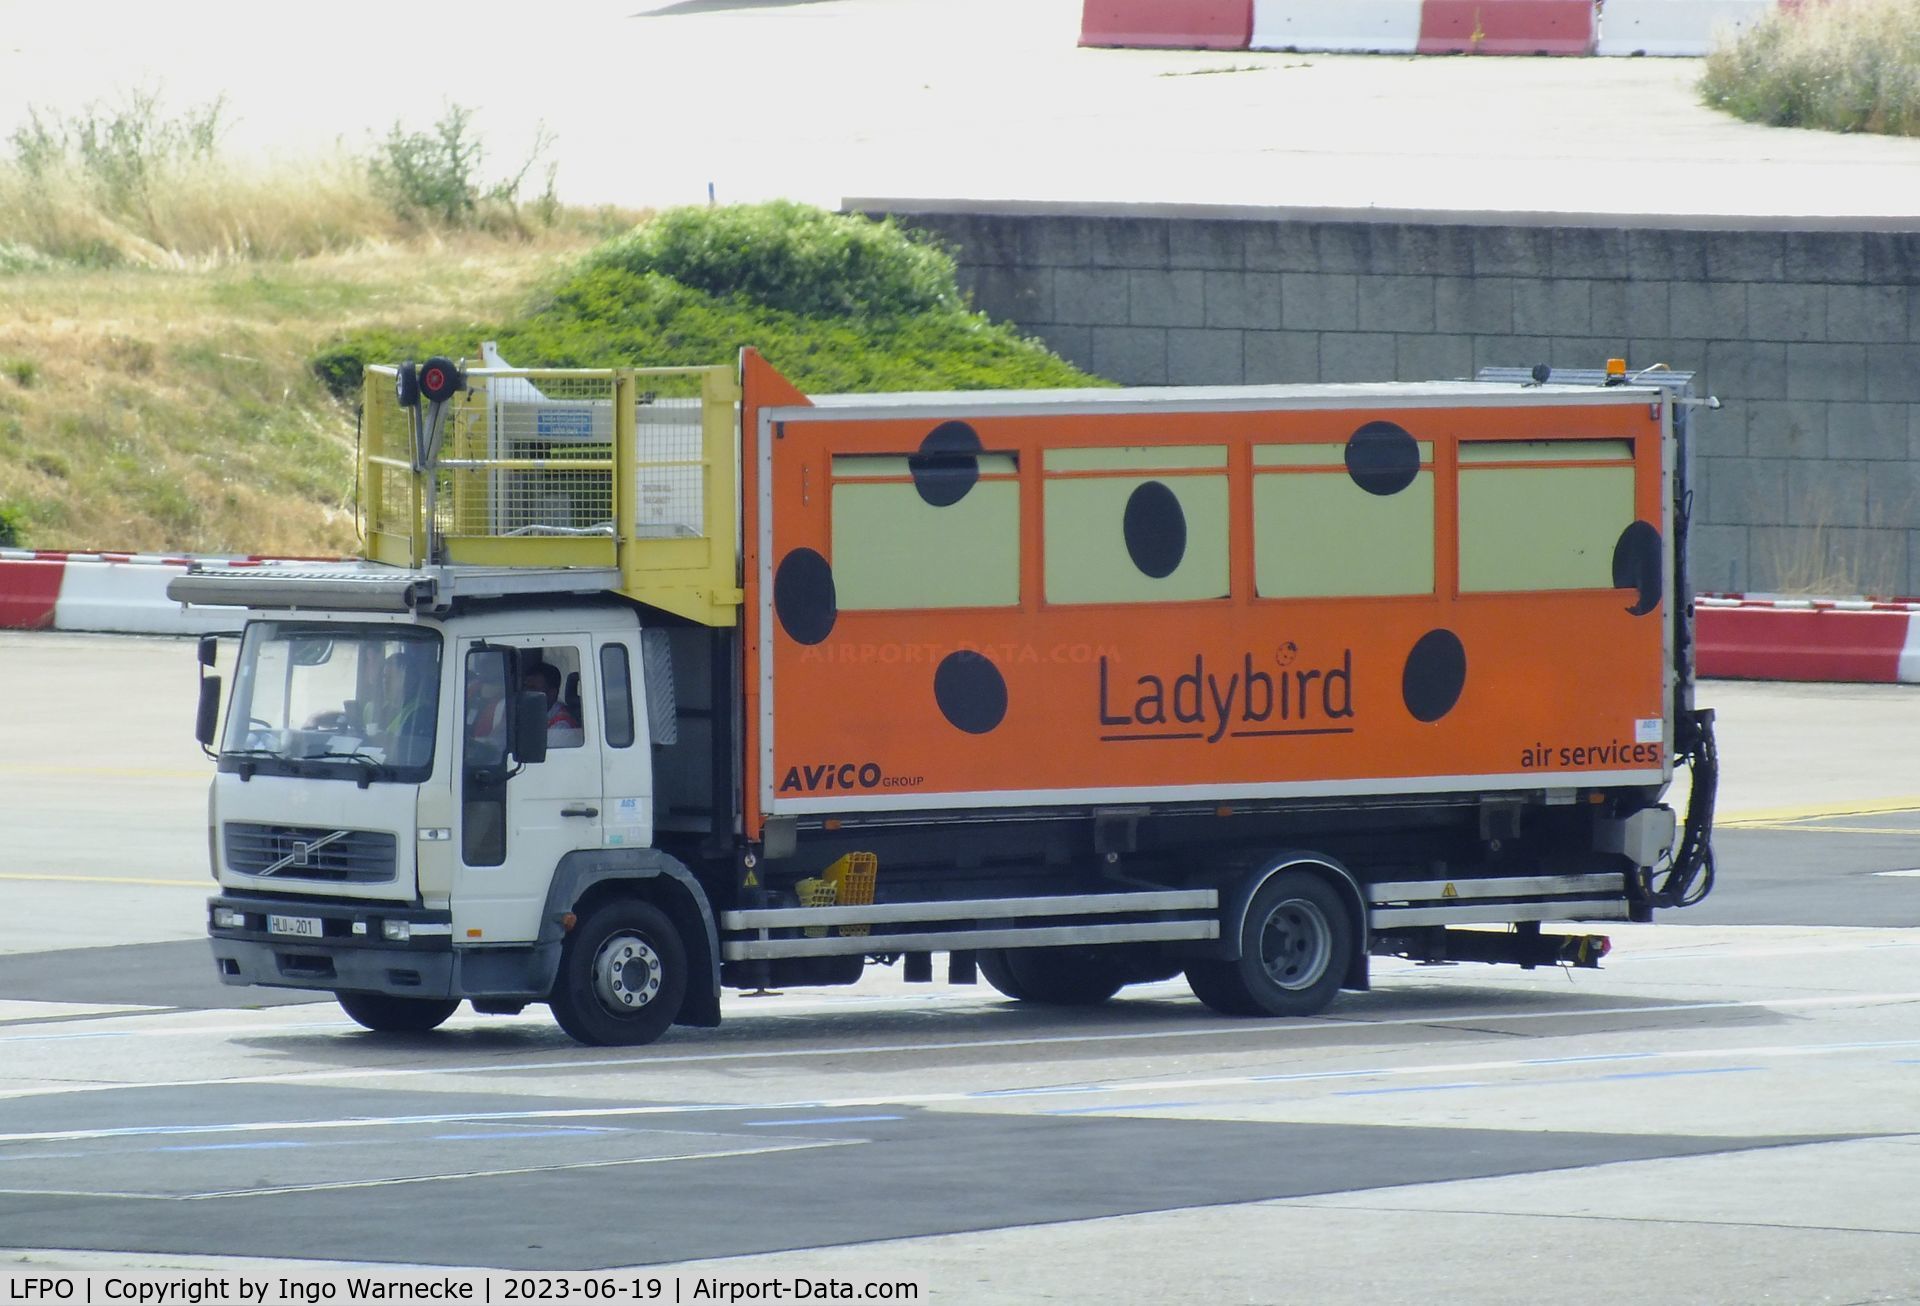 Paris Orly Airport, Orly (near Paris) France (LFPO) - airliner cleaning crew truck at Paris/Orly airport